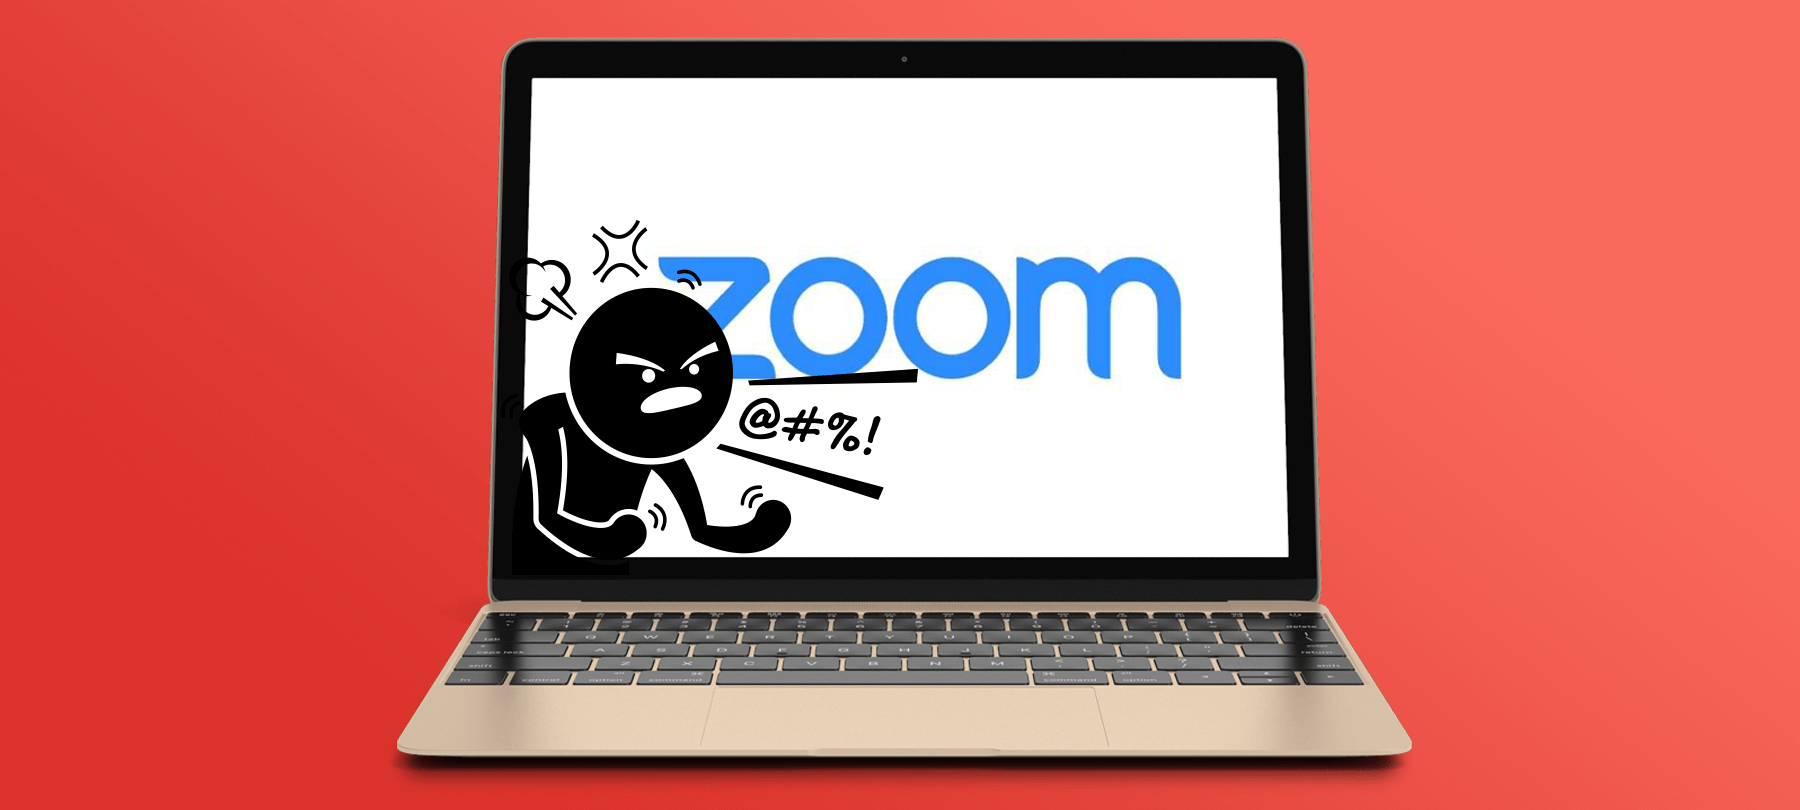 Zoom security flaw